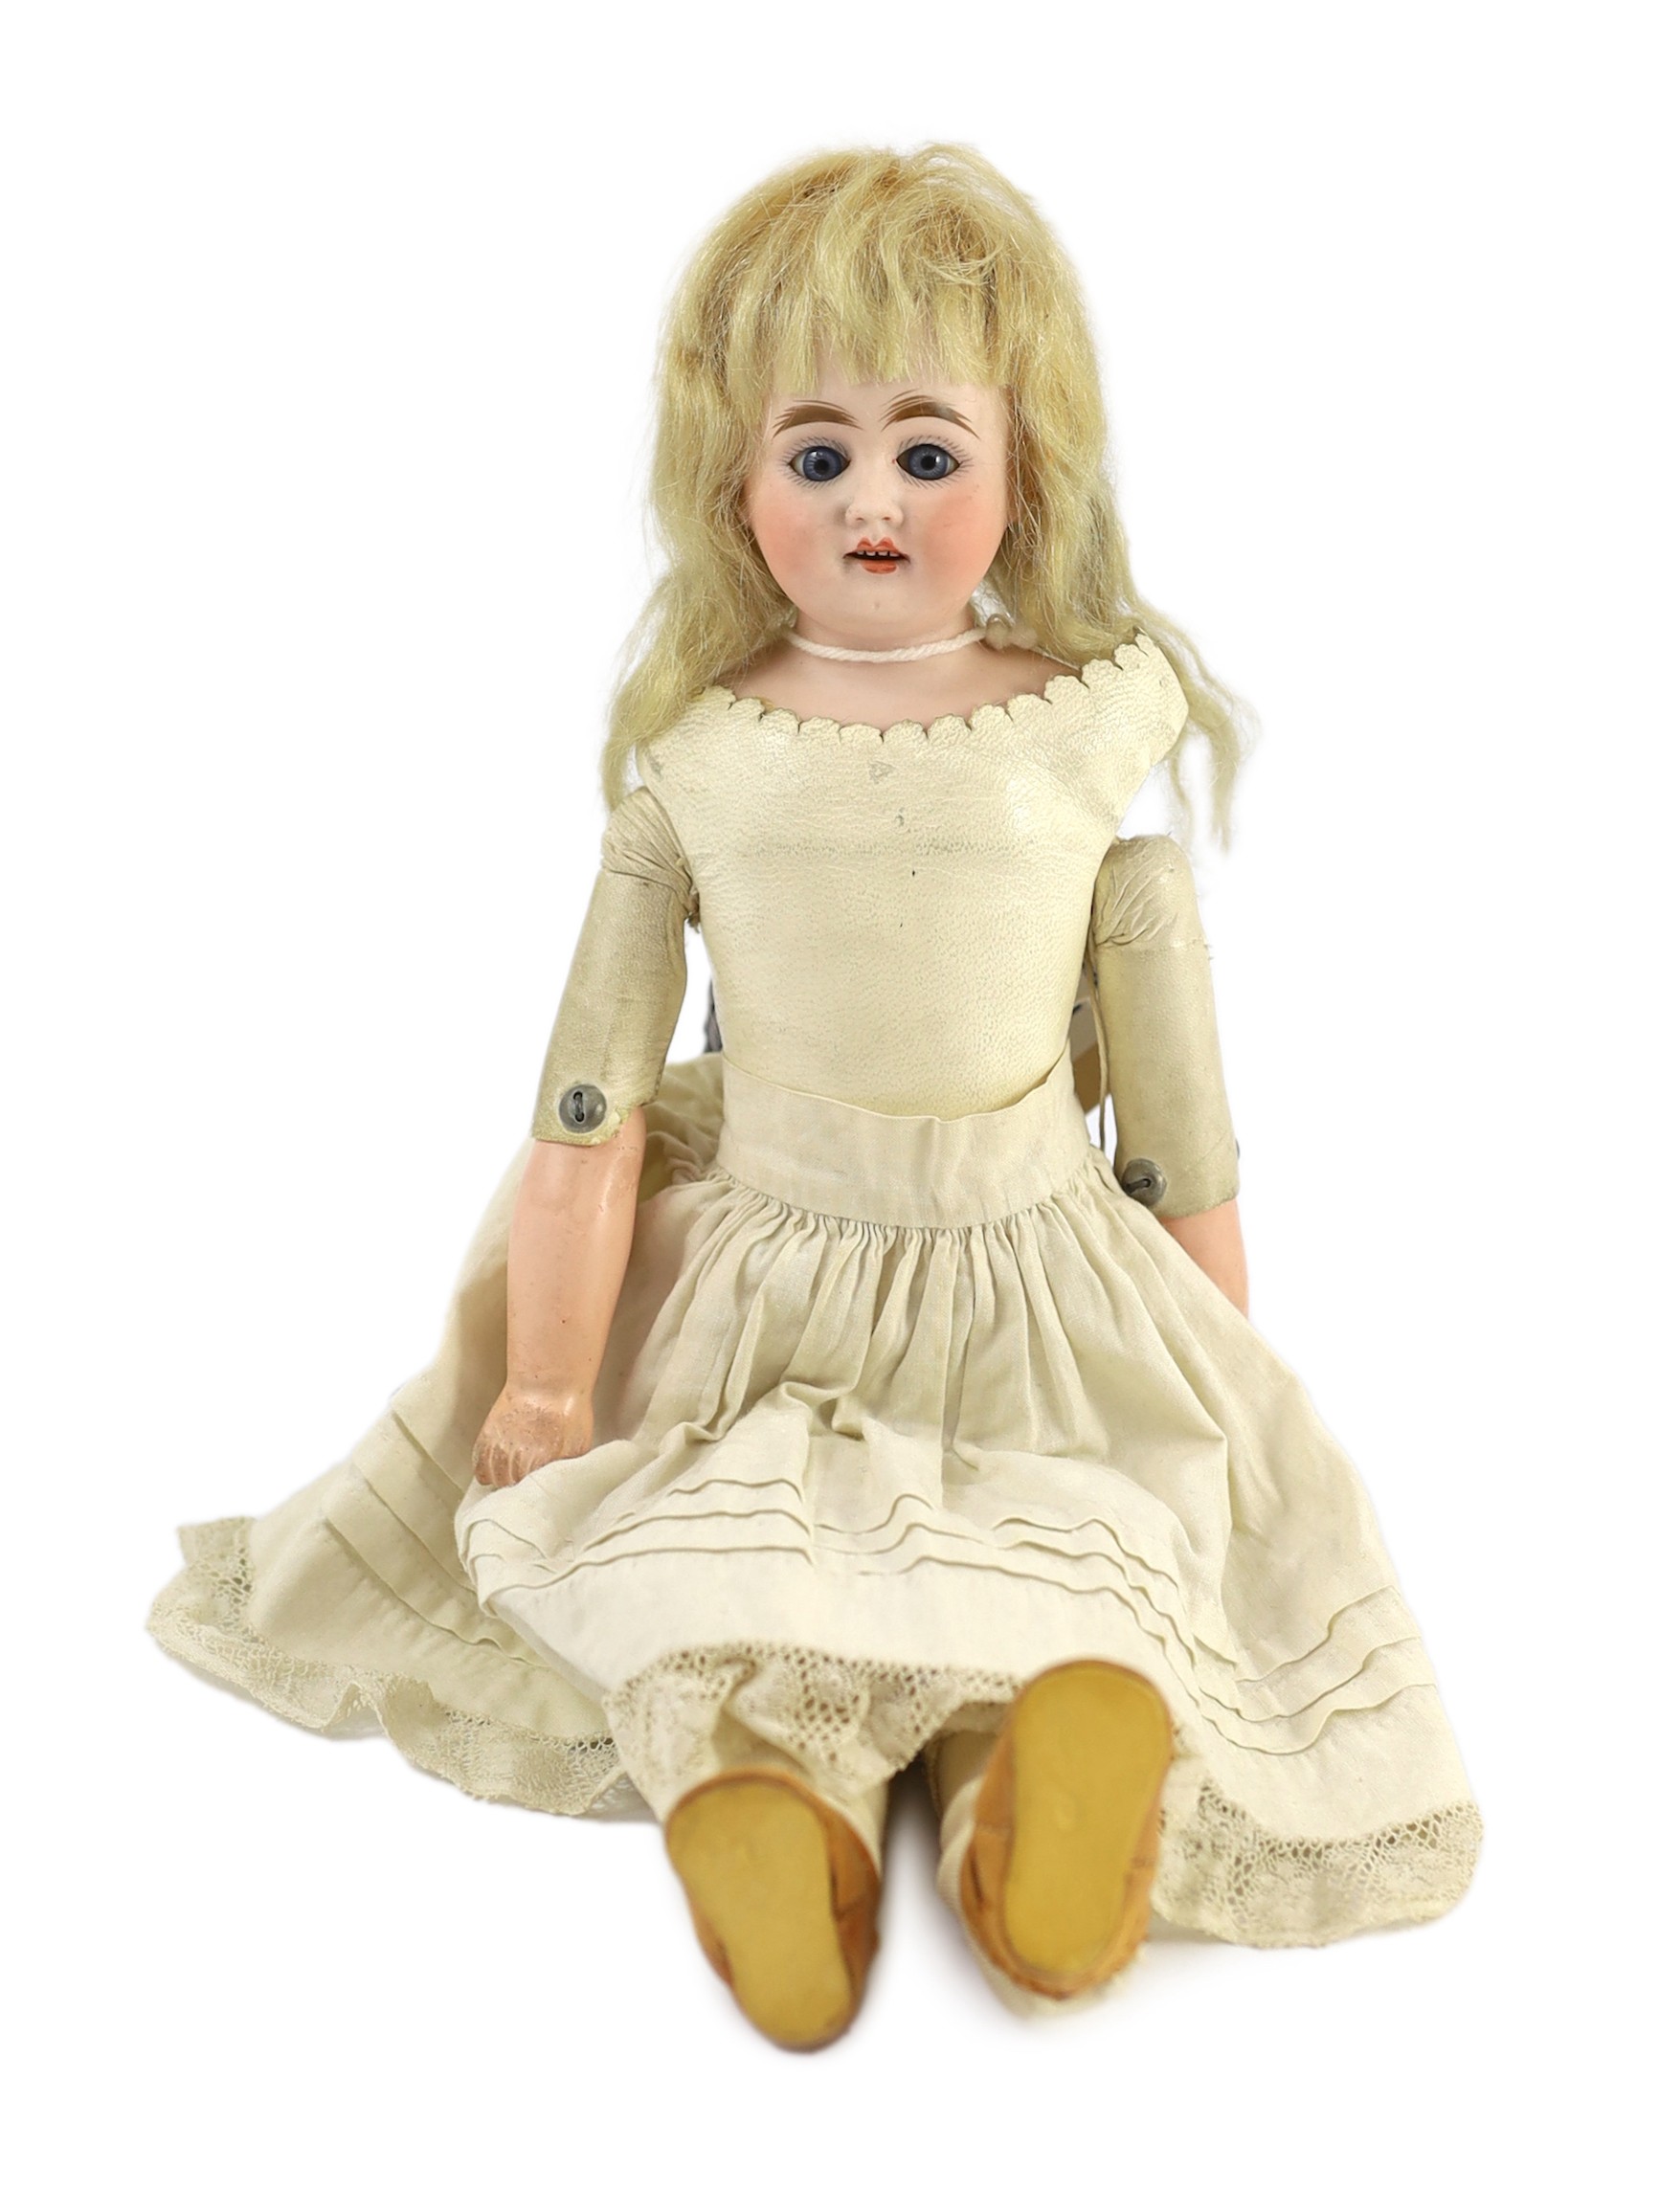 An Armand Marseille shoulder-bisque doll, German, circa 1896, impressed 309 3, with open mouth and